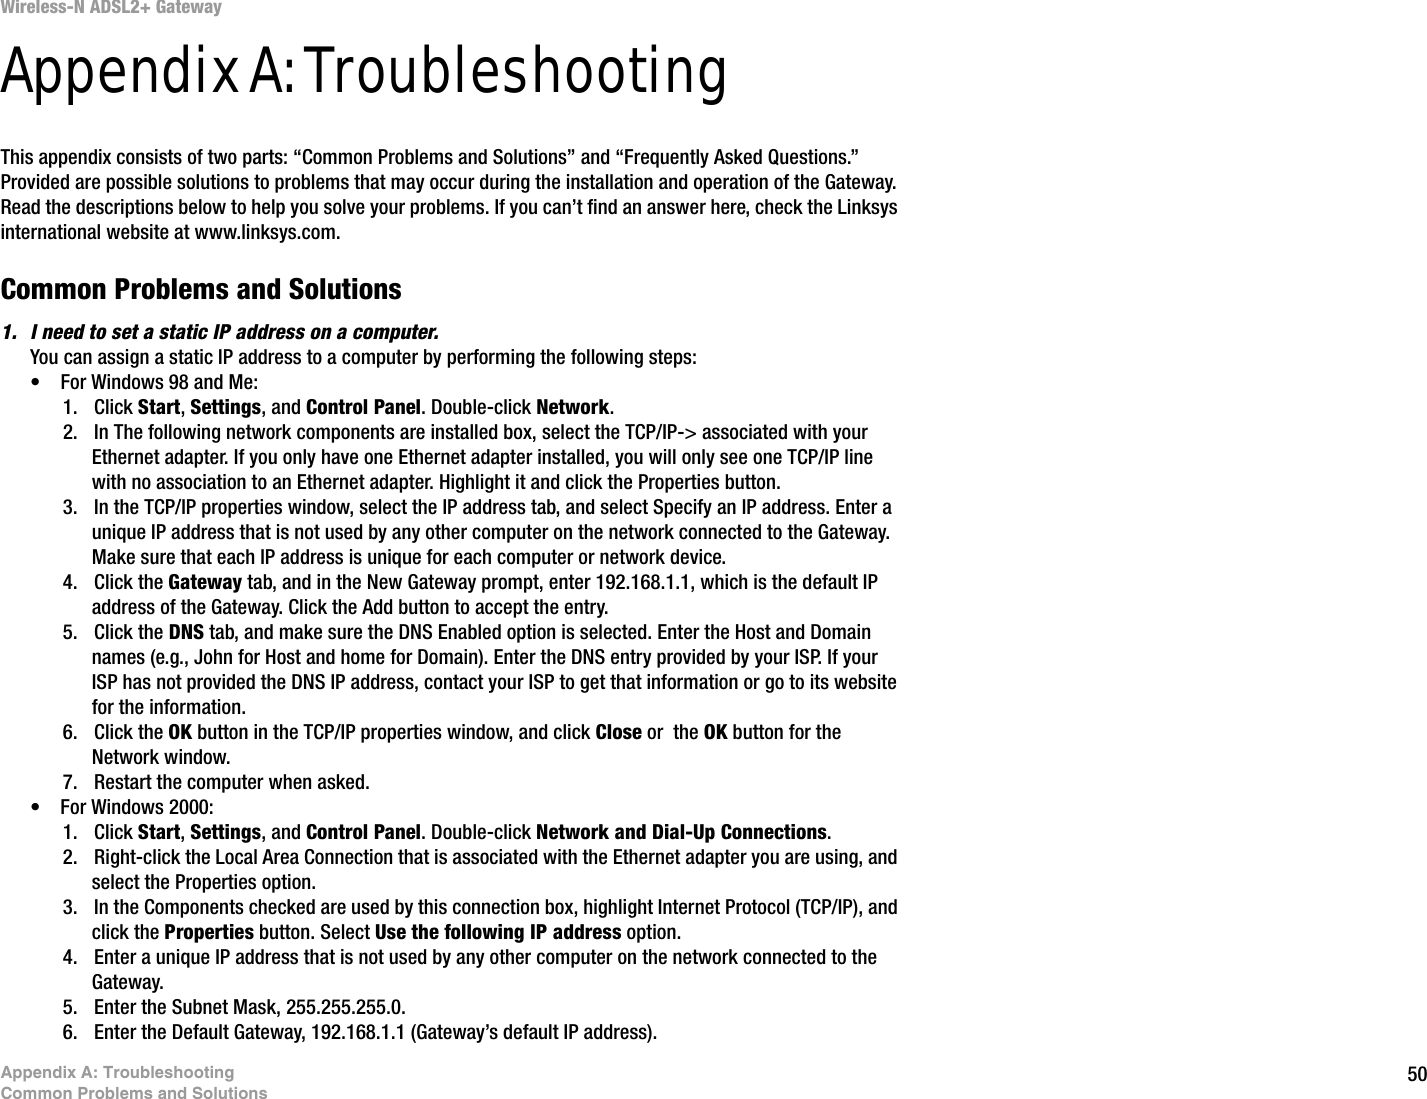 50Appendix A: TroubleshootingCommon Problems and SolutionsWireless-N ADSL2+ GatewayAppendix A: TroubleshootingThis appendix consists of two parts: “Common Problems and Solutions” and “Frequently Asked Questions.” Provided are possible solutions to problems that may occur during the installation and operation of the Gateway. Read the descriptions below to help you solve your problems. If you can’t find an answer here, check the Linksys international website at www.linksys.com.Common Problems and Solutions1. I need to set a static IP address on a computer.You can assign a static IP address to a computer by performing the following steps:• For Windows 98 and Me:1. Click Start, Settings, and Control Panel. Double-click Network.2. In The following network components are installed box, select the TCP/IP-&gt; associated with your Ethernet adapter. If you only have one Ethernet adapter installed, you will only see one TCP/IP line with no association to an Ethernet adapter. Highlight it and click the Properties button.3. In the TCP/IP properties window, select the IP address tab, and select Specify an IP address. Enter a unique IP address that is not used by any other computer on the network connected to the Gateway. Make sure that each IP address is unique for each computer or network device.4. Click the Gateway tab, and in the New Gateway prompt, enter 192.168.1.1, which is the default IP address of the Gateway. Click the Add button to accept the entry.5. Click the DNS tab, and make sure the DNS Enabled option is selected. Enter the Host and Domain names (e.g., John for Host and home for Domain). Enter the DNS entry provided by your ISP. If your ISP has not provided the DNS IP address, contact your ISP to get that information or go to its website for the information.6. Click the OK button in the TCP/IP properties window, and click Close or  the OK button for the Network window.7. Restart the computer when asked.• For Windows 2000:1. Click Start, Settings, and Control Panel. Double-click Network and Dial-Up Connections.2. Right-click the Local Area Connection that is associated with the Ethernet adapter you are using, and select the Properties option.3. In the Components checked are used by this connection box, highlight Internet Protocol (TCP/IP), and click the Properties button. Select Use the following IP address option.4. Enter a unique IP address that is not used by any other computer on the network connected to the Gateway. 5. Enter the Subnet Mask, 255.255.255.0.6. Enter the Default Gateway, 192.168.1.1 (Gateway’s default IP address).